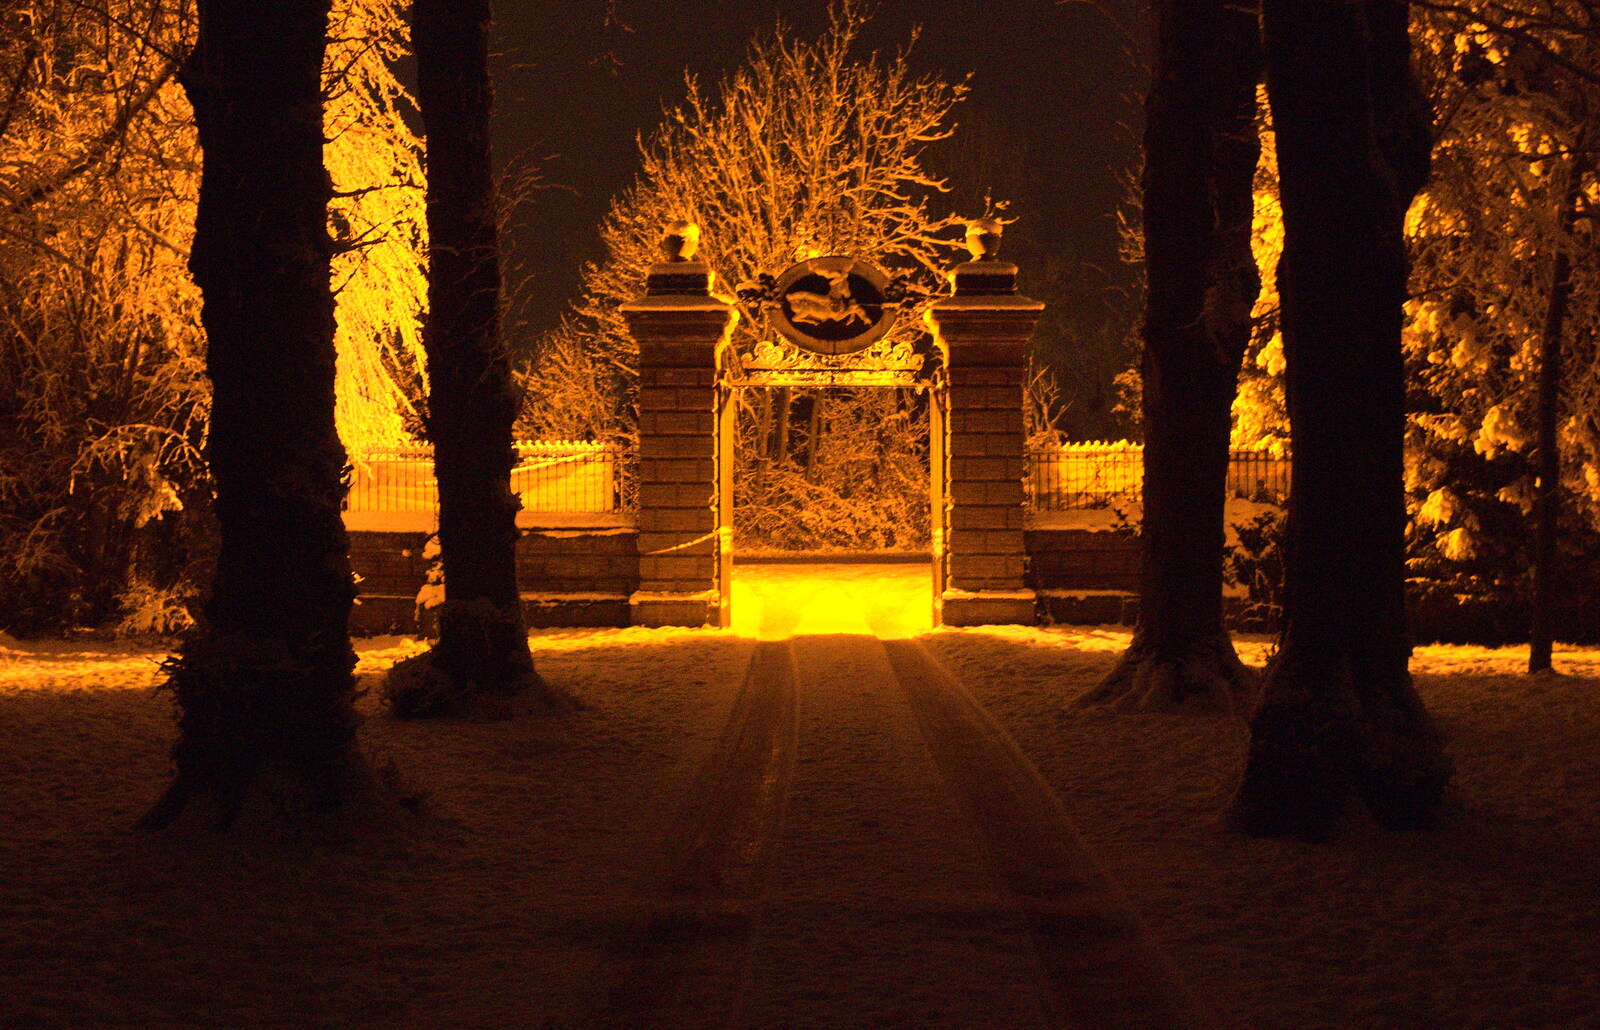 The Oaksmere's front gate from A Couple of Snow Days, Brome, Suffolk - 16th January 2013